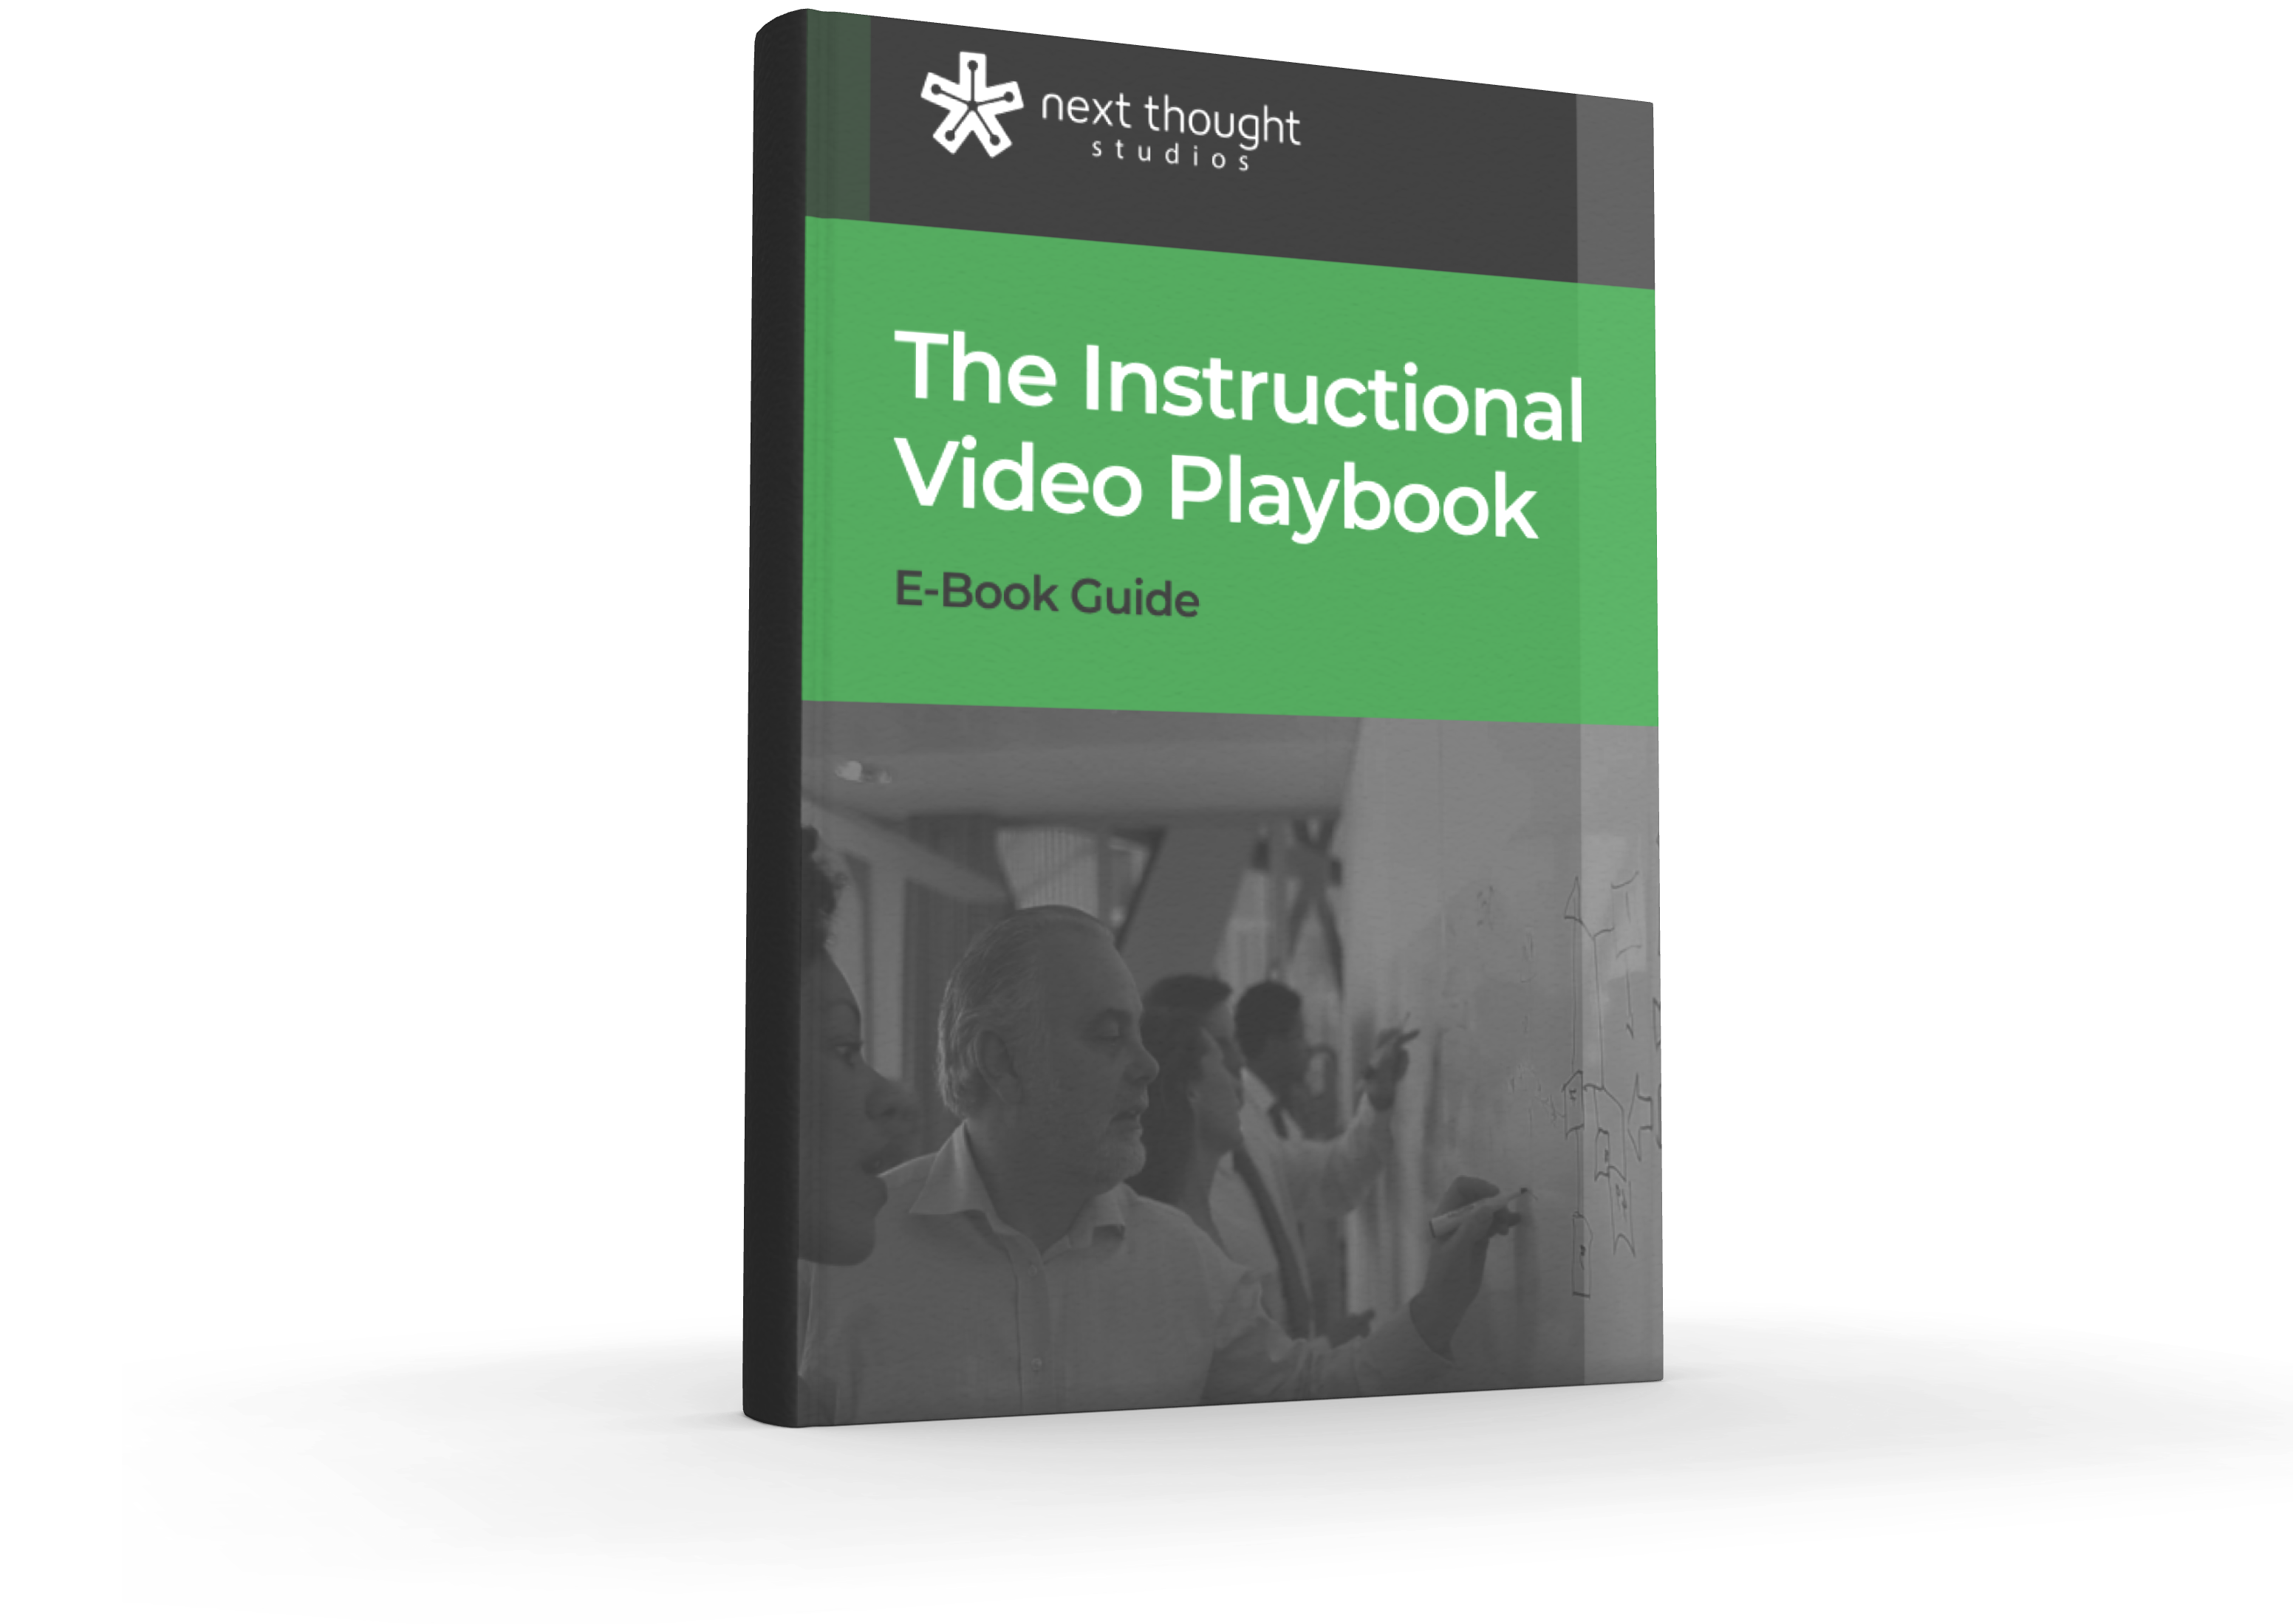 Mockup - The Instructional Video Playbook